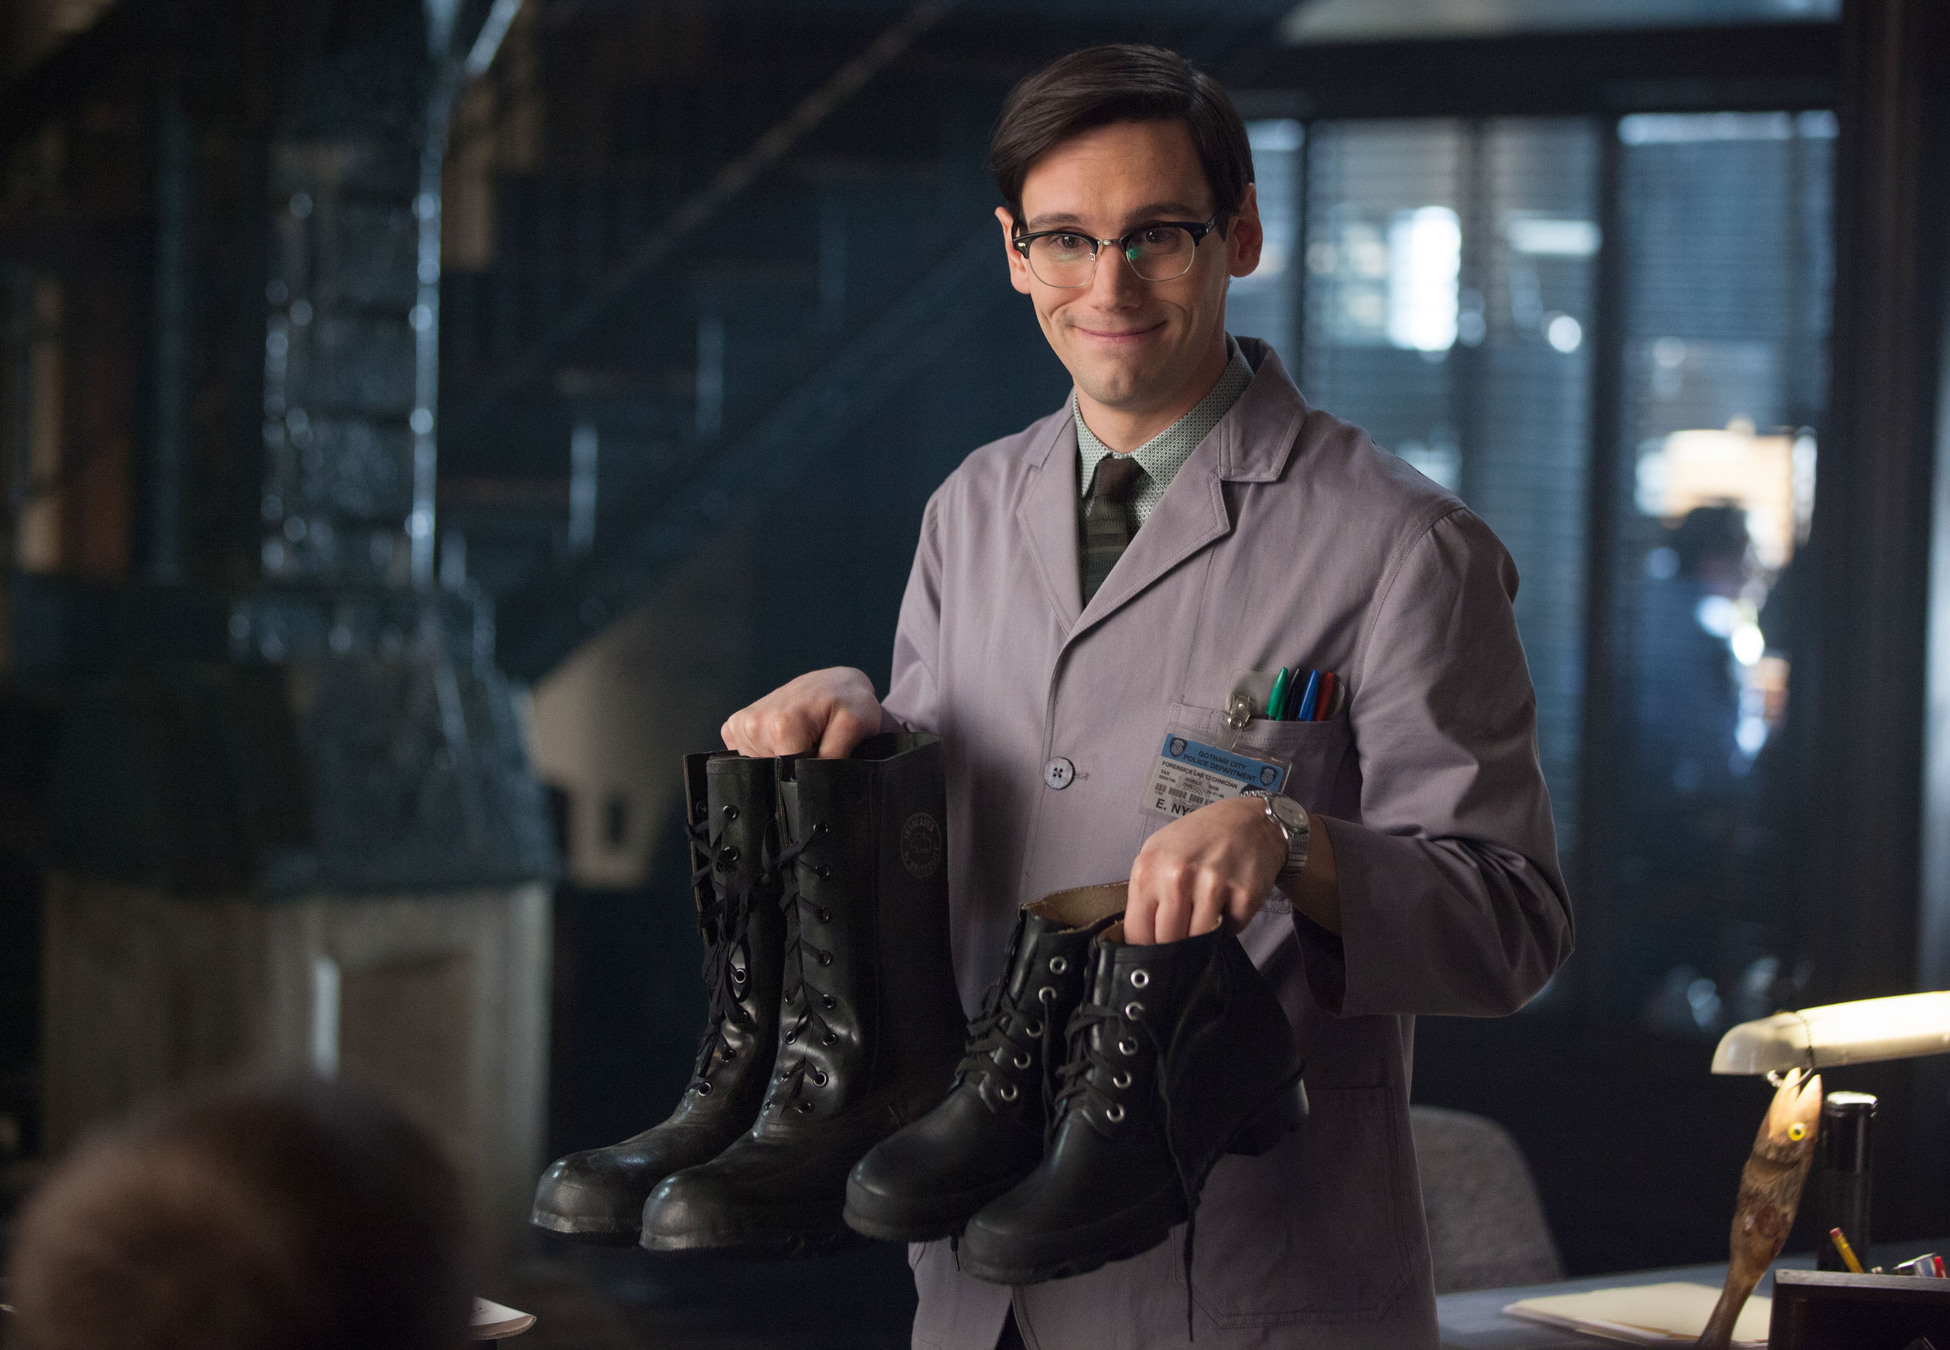 GOTHAM: Edward Nygma (Cory Michael Smith) suggests Detectives James Gordon and Harvey Bullock wear protective boots in the "What The Little Bird Told Him" episode of GOTHAM airing Monday, Jan. 19 (8:00-9:00 PM ET/PT) on FOX. Â©2014 Fox Broadcasting Co. Cr: Jessica Miglio/FOX